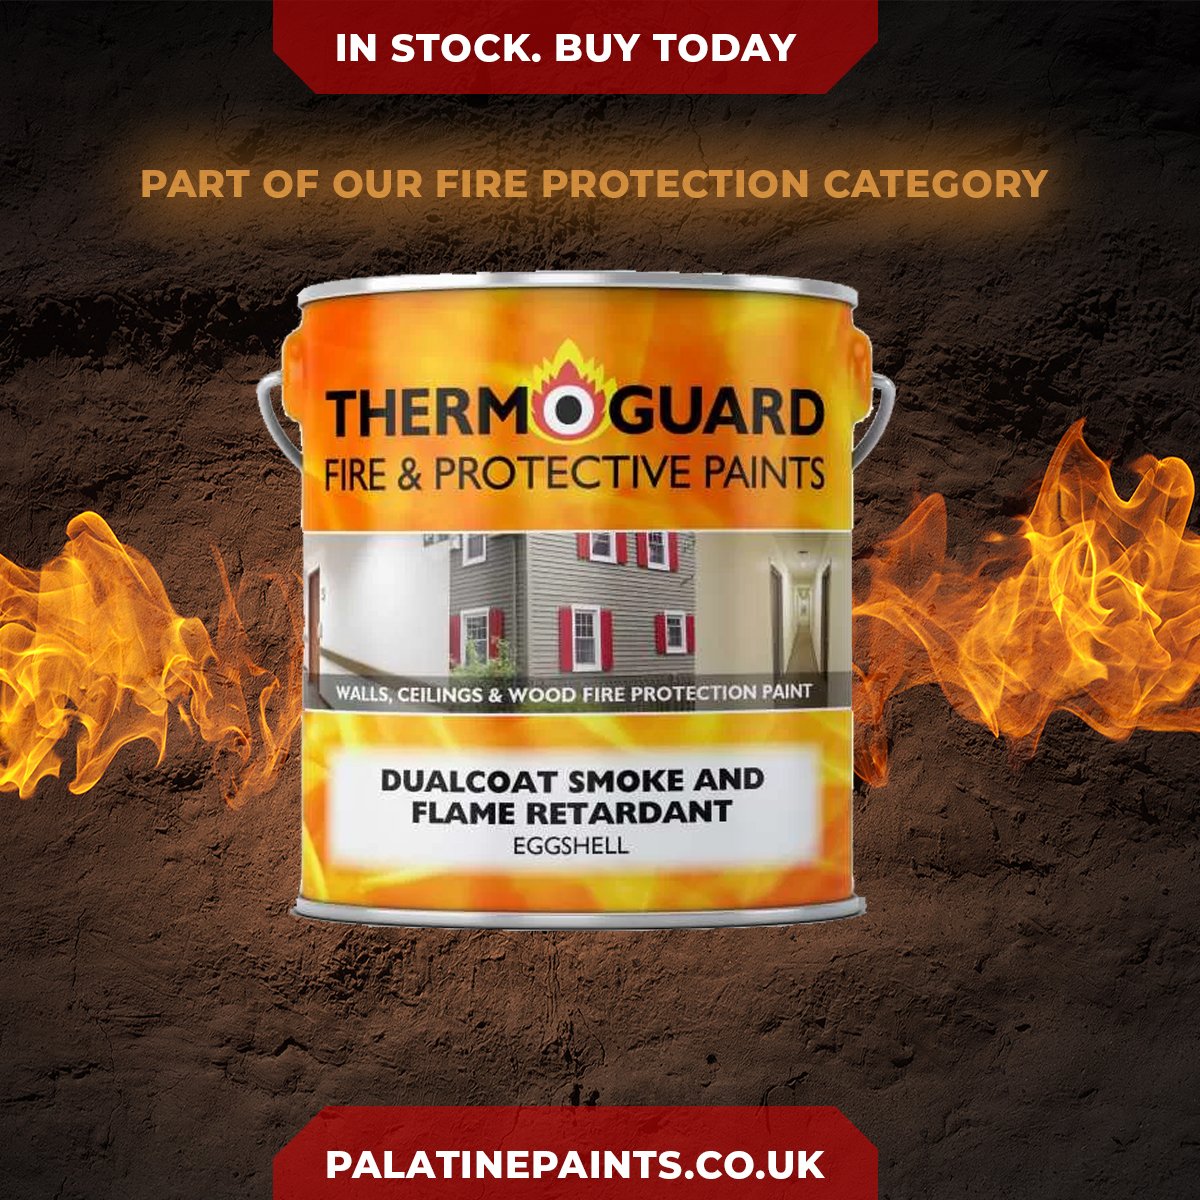 **Fire Protection**

Thermoguard Dualcoat Smoke and Flame Retardant Topcoat is a water-based decorative topcoat that forms part of an intumescent system for wood, internal steel and cast iron. 

👉🛒Buy yours today: palatinepaints.co.uk/product/thermo…